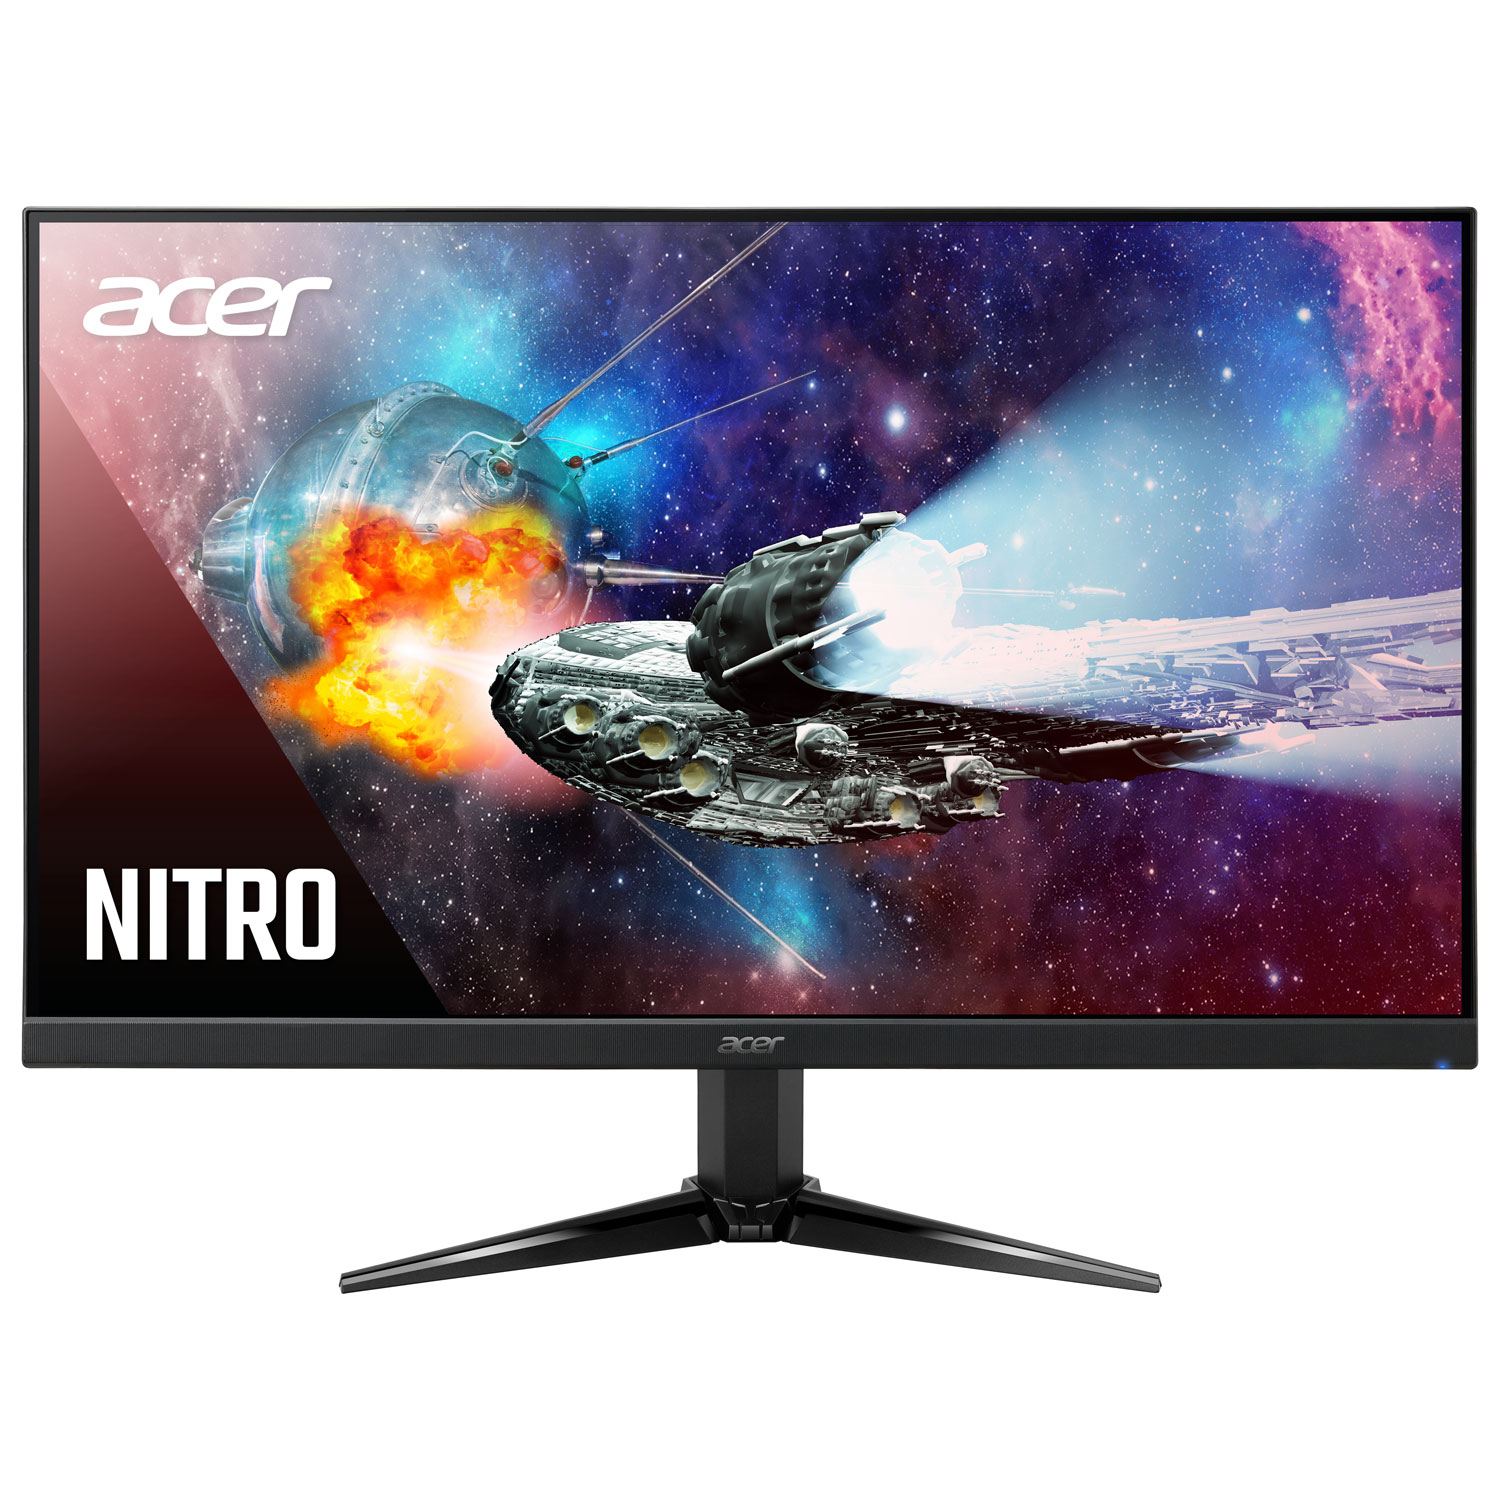 Acer 23.8" FHD 165Hz 1ms GTG VA LED Gaming Monitor (QG241Y PBMIIPX) - Black - Only at Best Buy